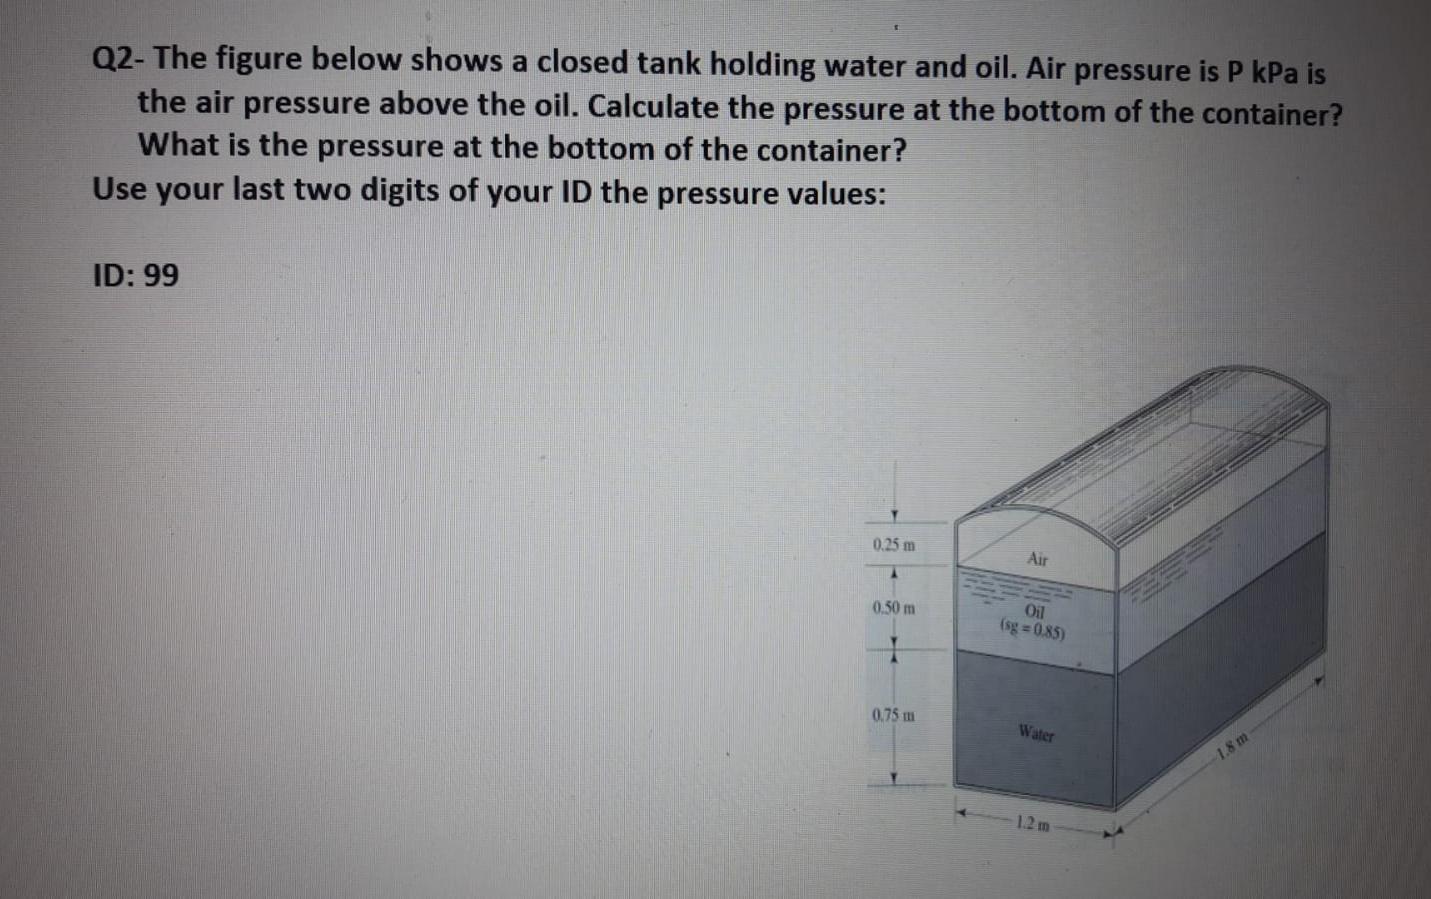 Q2- The figure below shows a closed tank holding water and oil. Air pressure is P kPa isthe air pressure above the oil. Calc